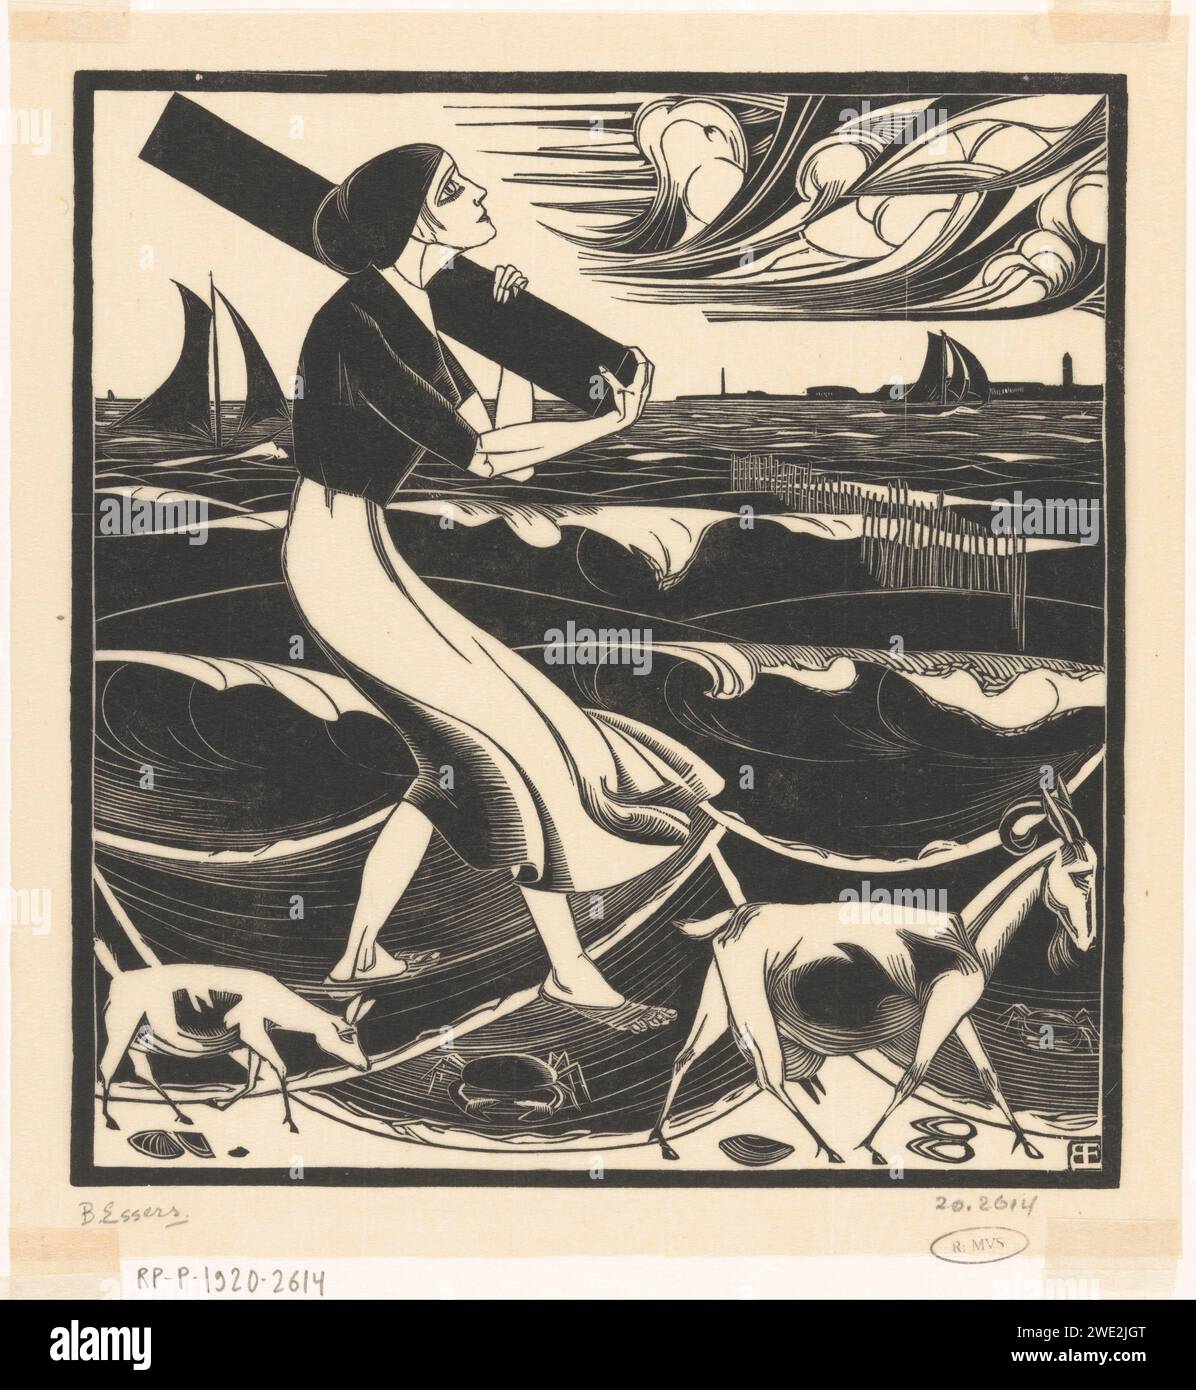 Strand, Bernard Essers, 1919 print A woman on the beach wears a cylindrical object on her shoulder. Next to her a goat, a goat and two crabs. A pole head and sailing ships in the water.  paper  beach. carrying something on the head or on the shoulders. goat Stock Photo